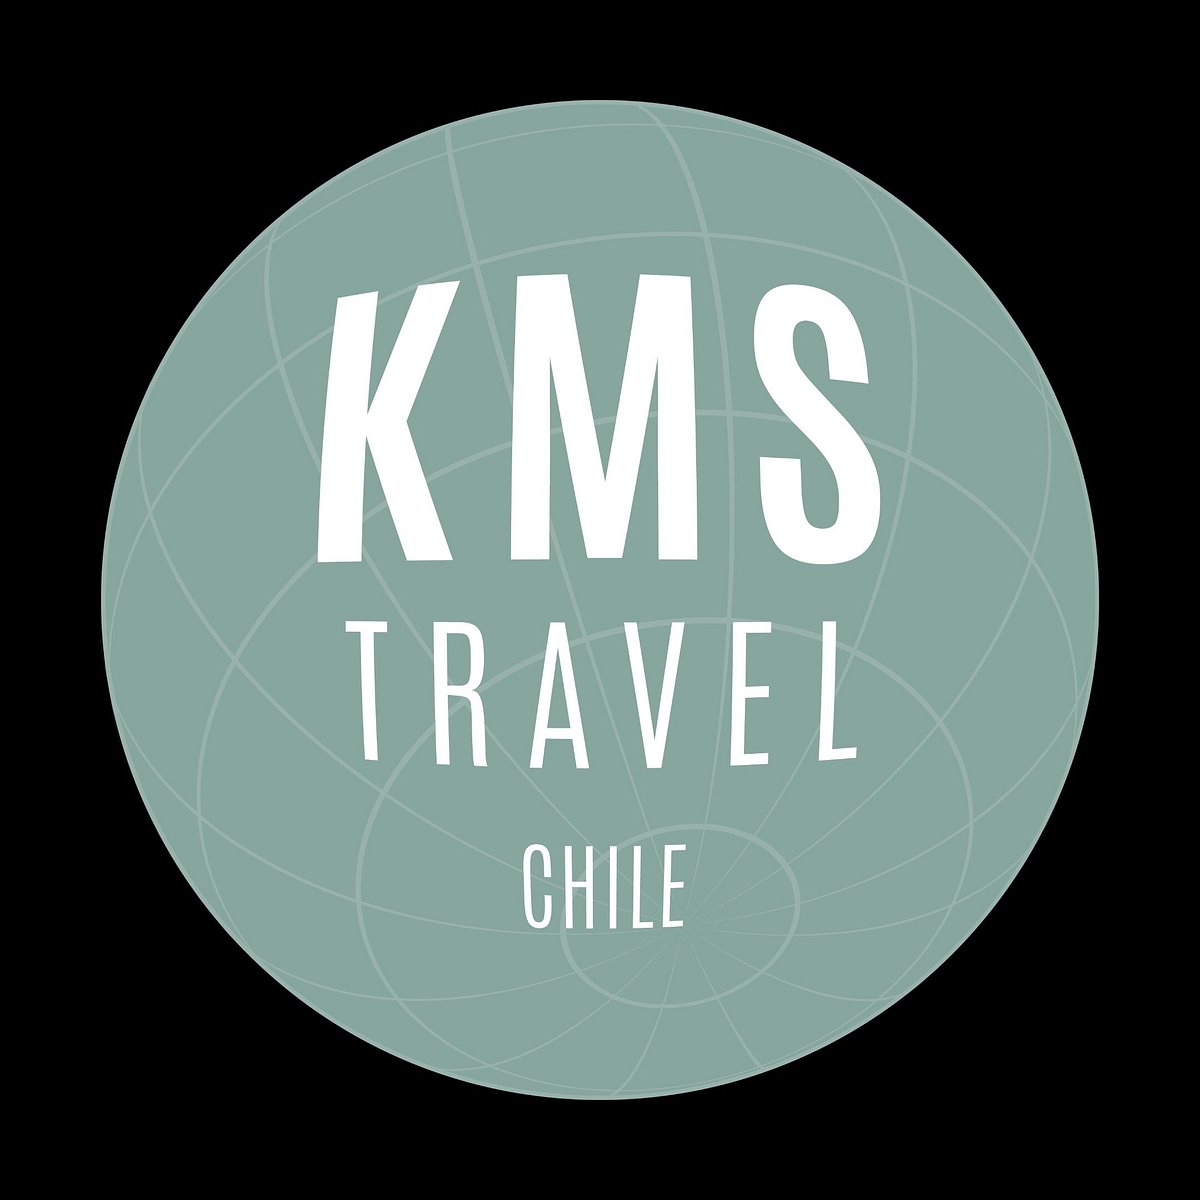 kms travel chile